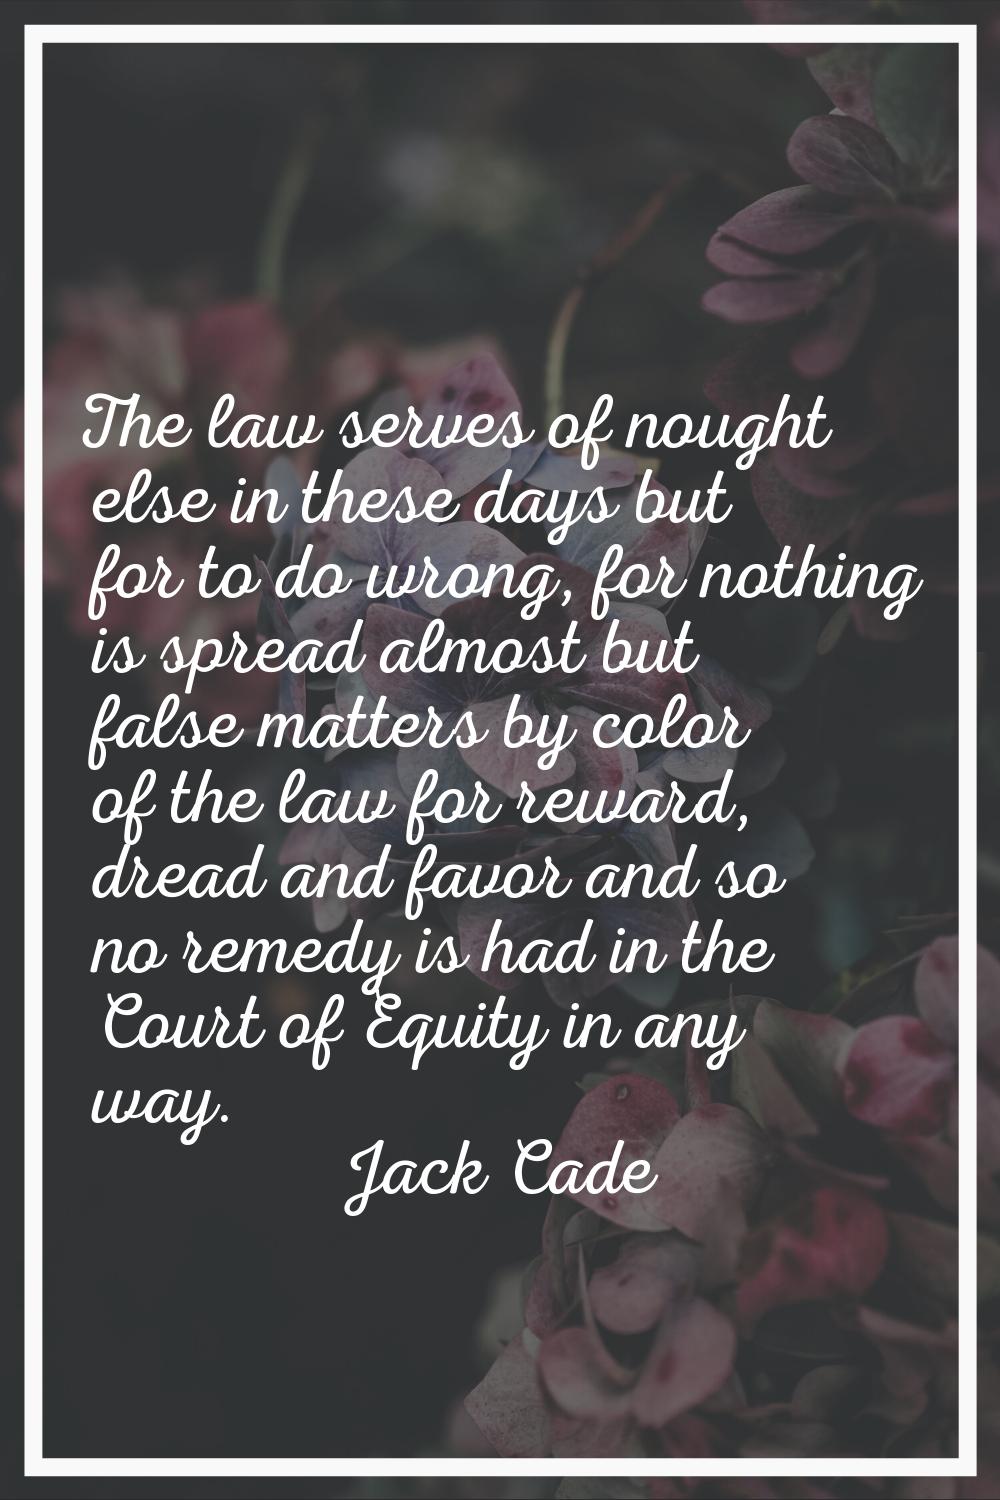 The law serves of nought else in these days but for to do wrong, for nothing is spread almost but f